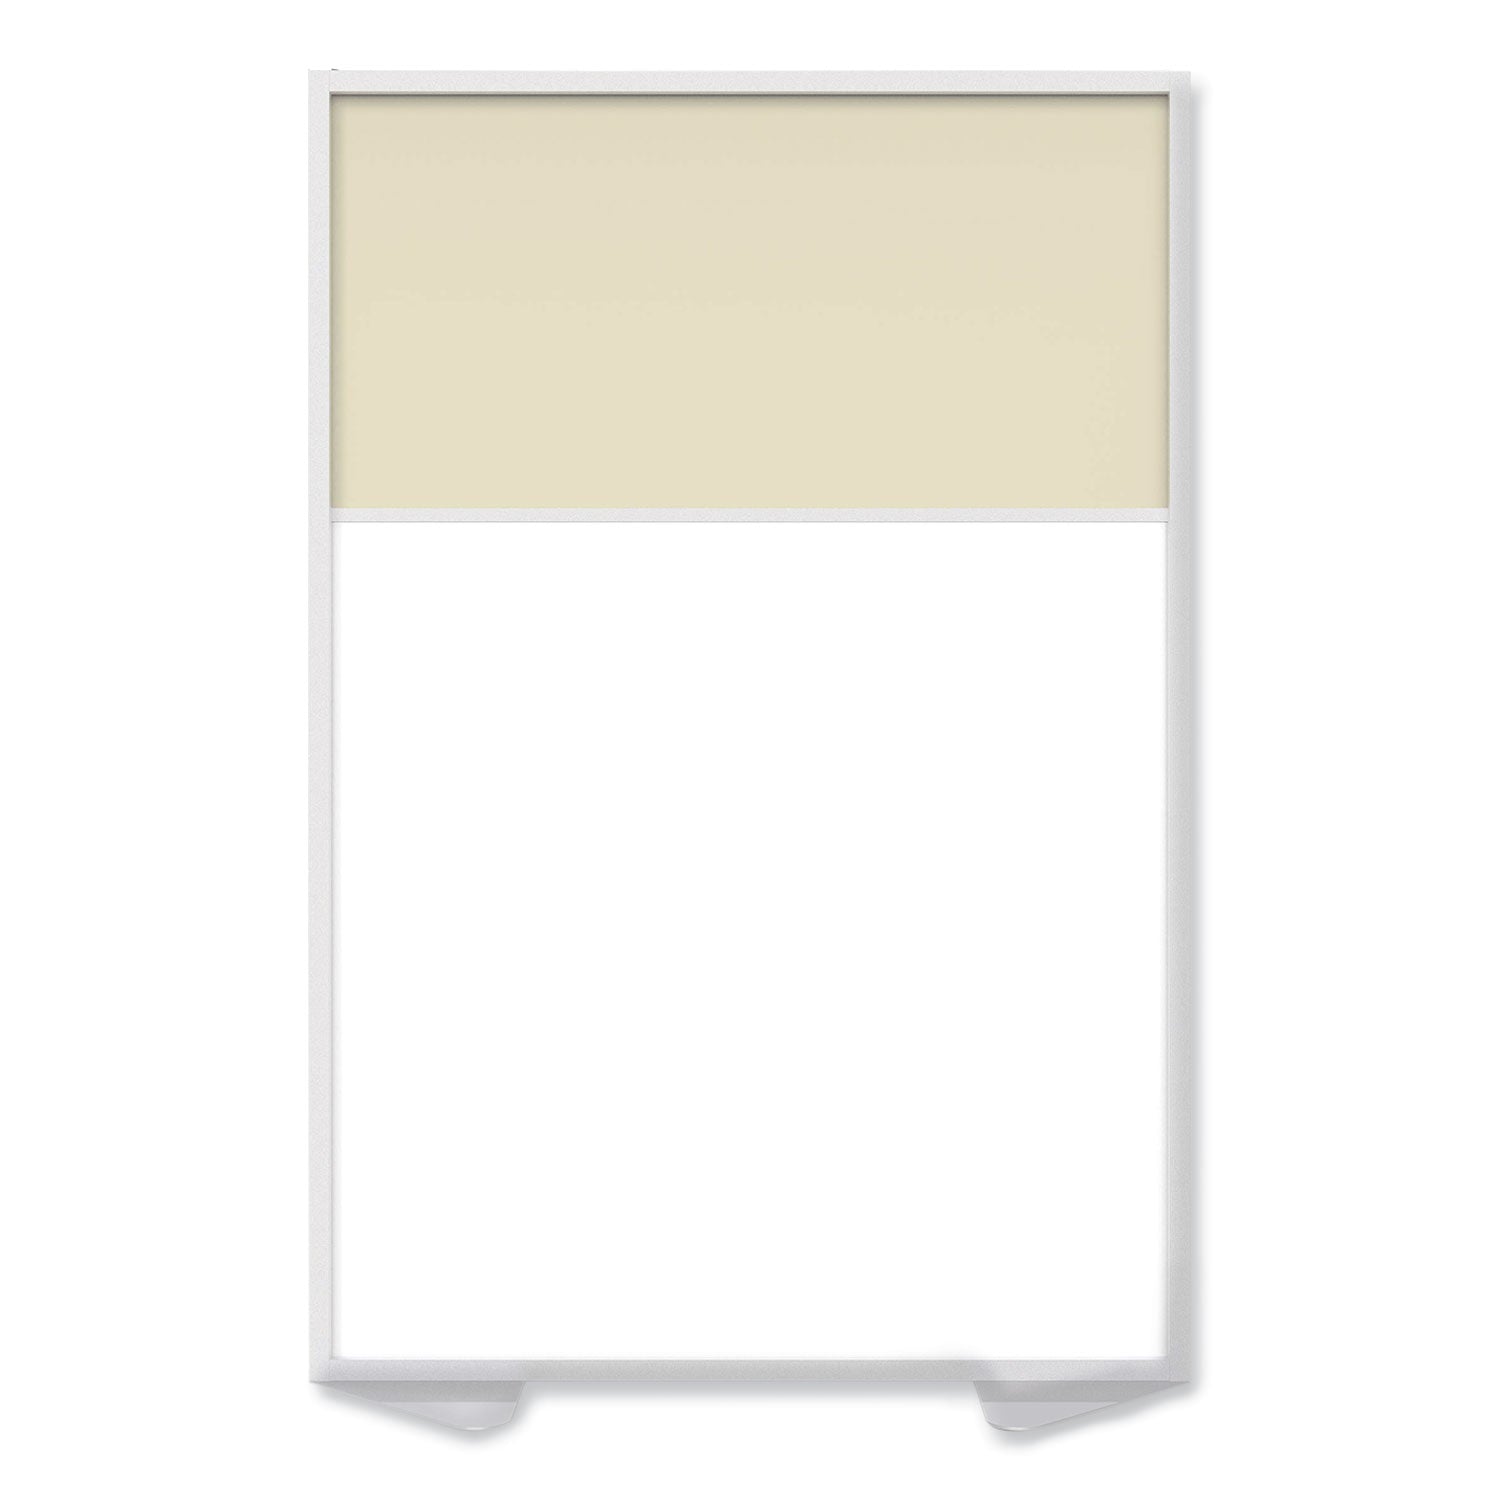 floor-partition-with-aluminum-frame-and-2-split-panel-infill-4806-x-204-x-7186-white-carmel-ships-in-7-10-business-days_ghemp7248208a - 2